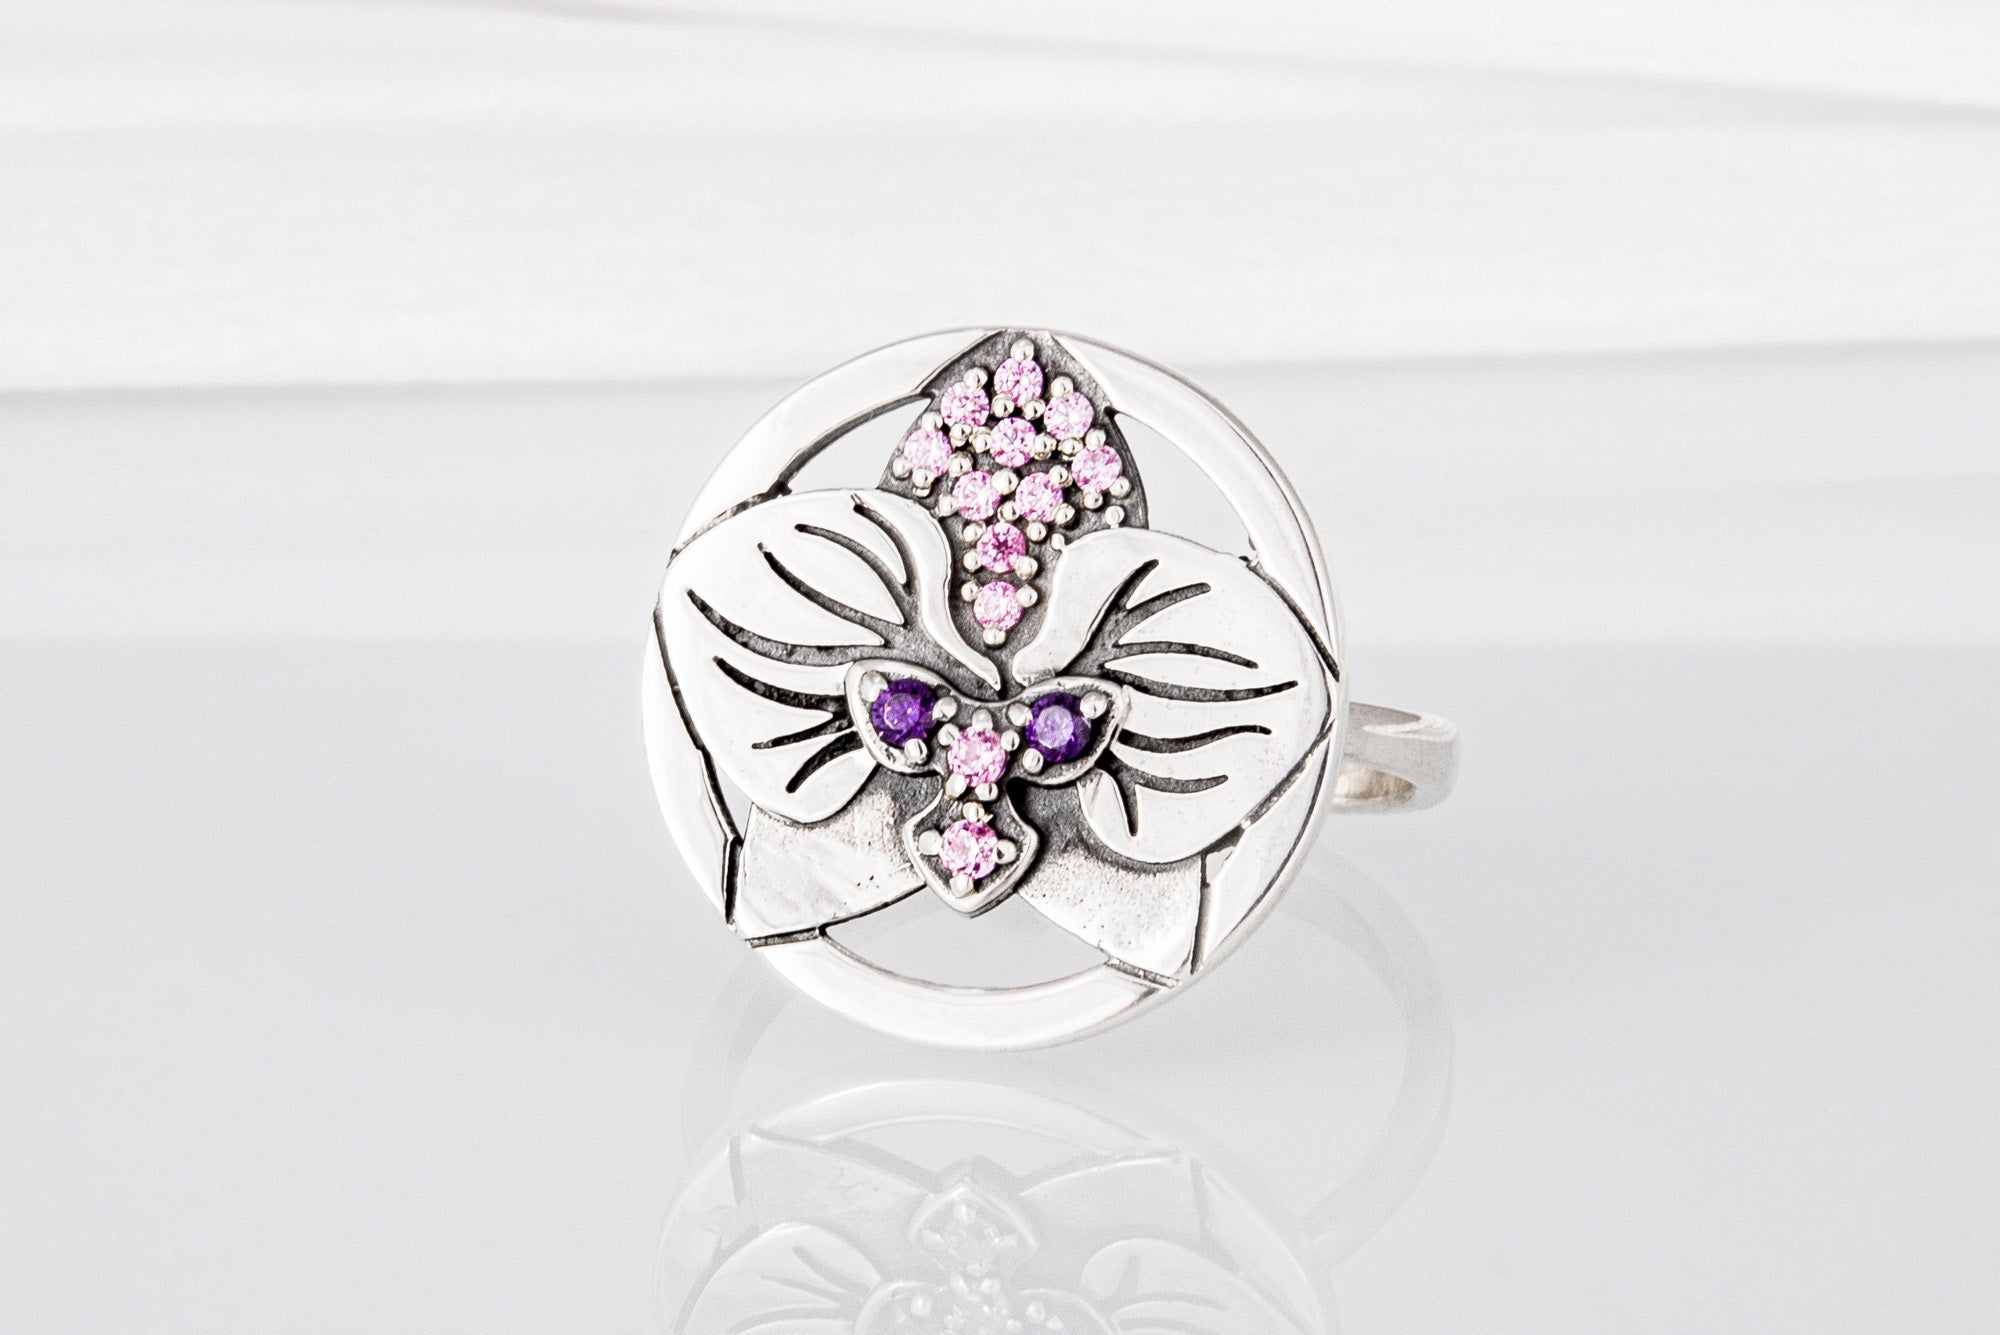 Minimalistic Round 925 Silver Ring with Orchid Flower and Gems, Unique Fashion Jewelry - vikingworkshop